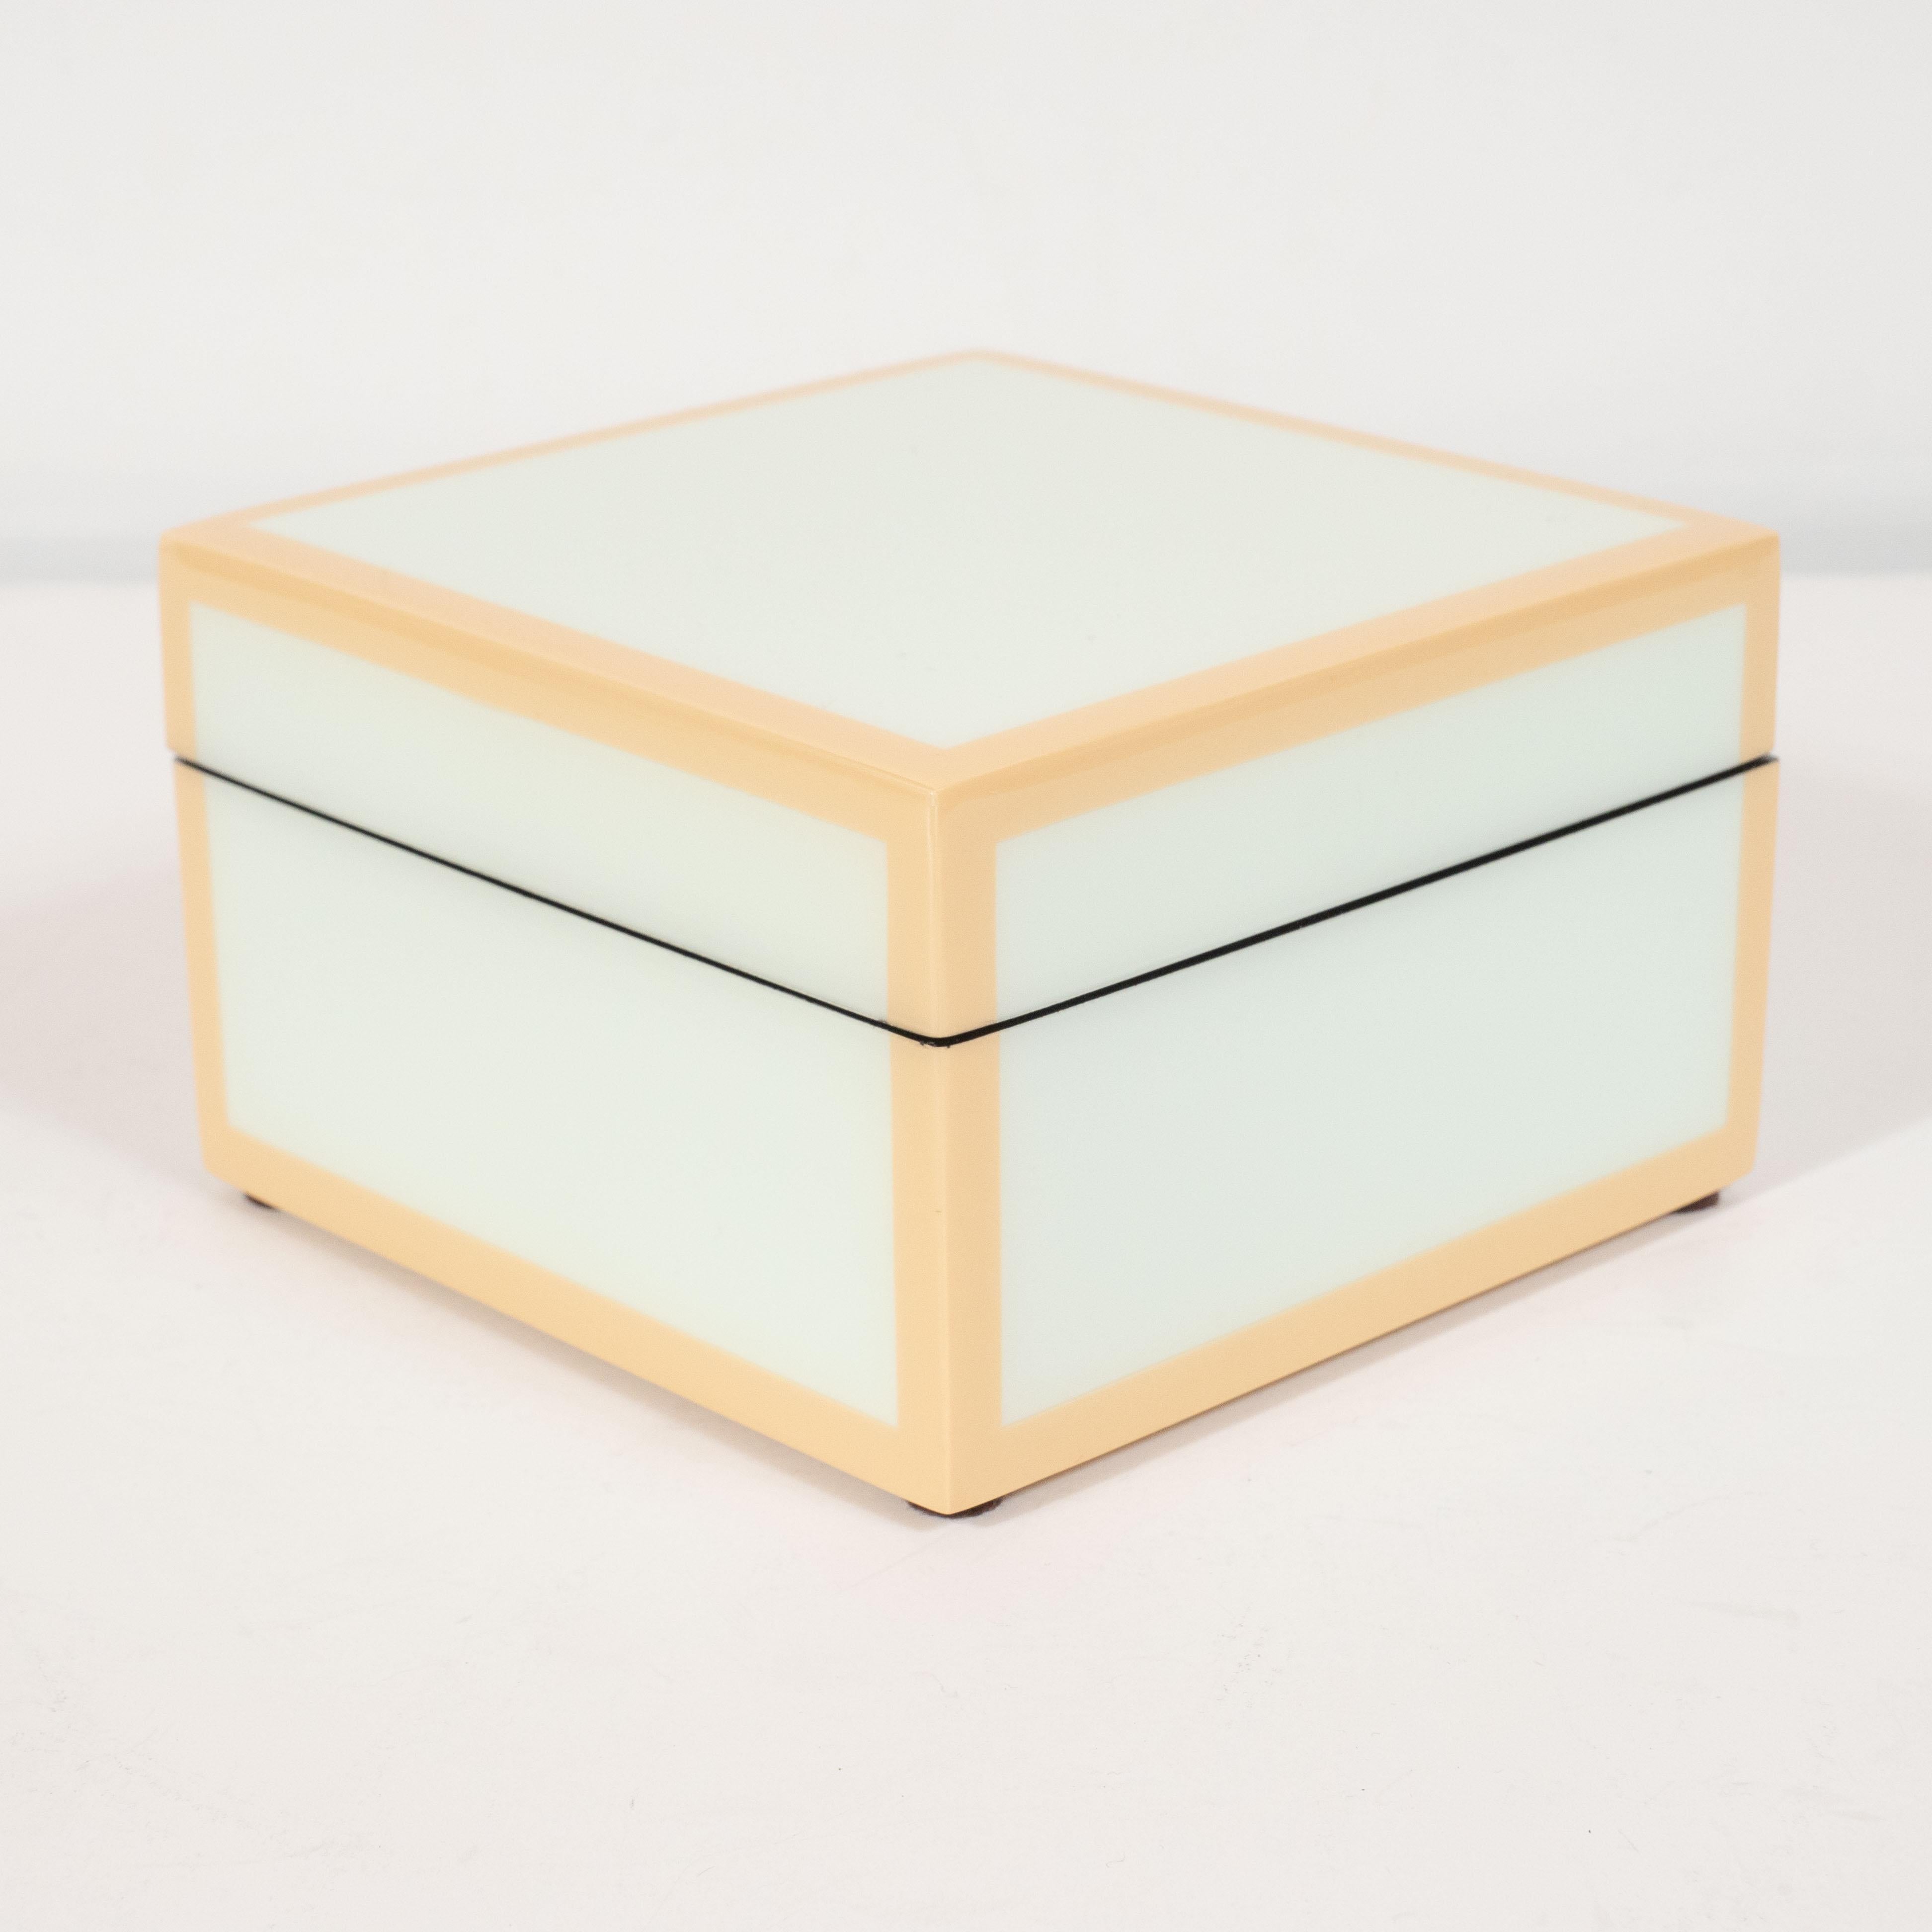 This elegant modernist lacquered box offers a square form with a lacquered exterior in a pale celadon hue with tan accents circumscribing each of the exterior edges. The interior of the box has been finished in black felt, testifying to the fact